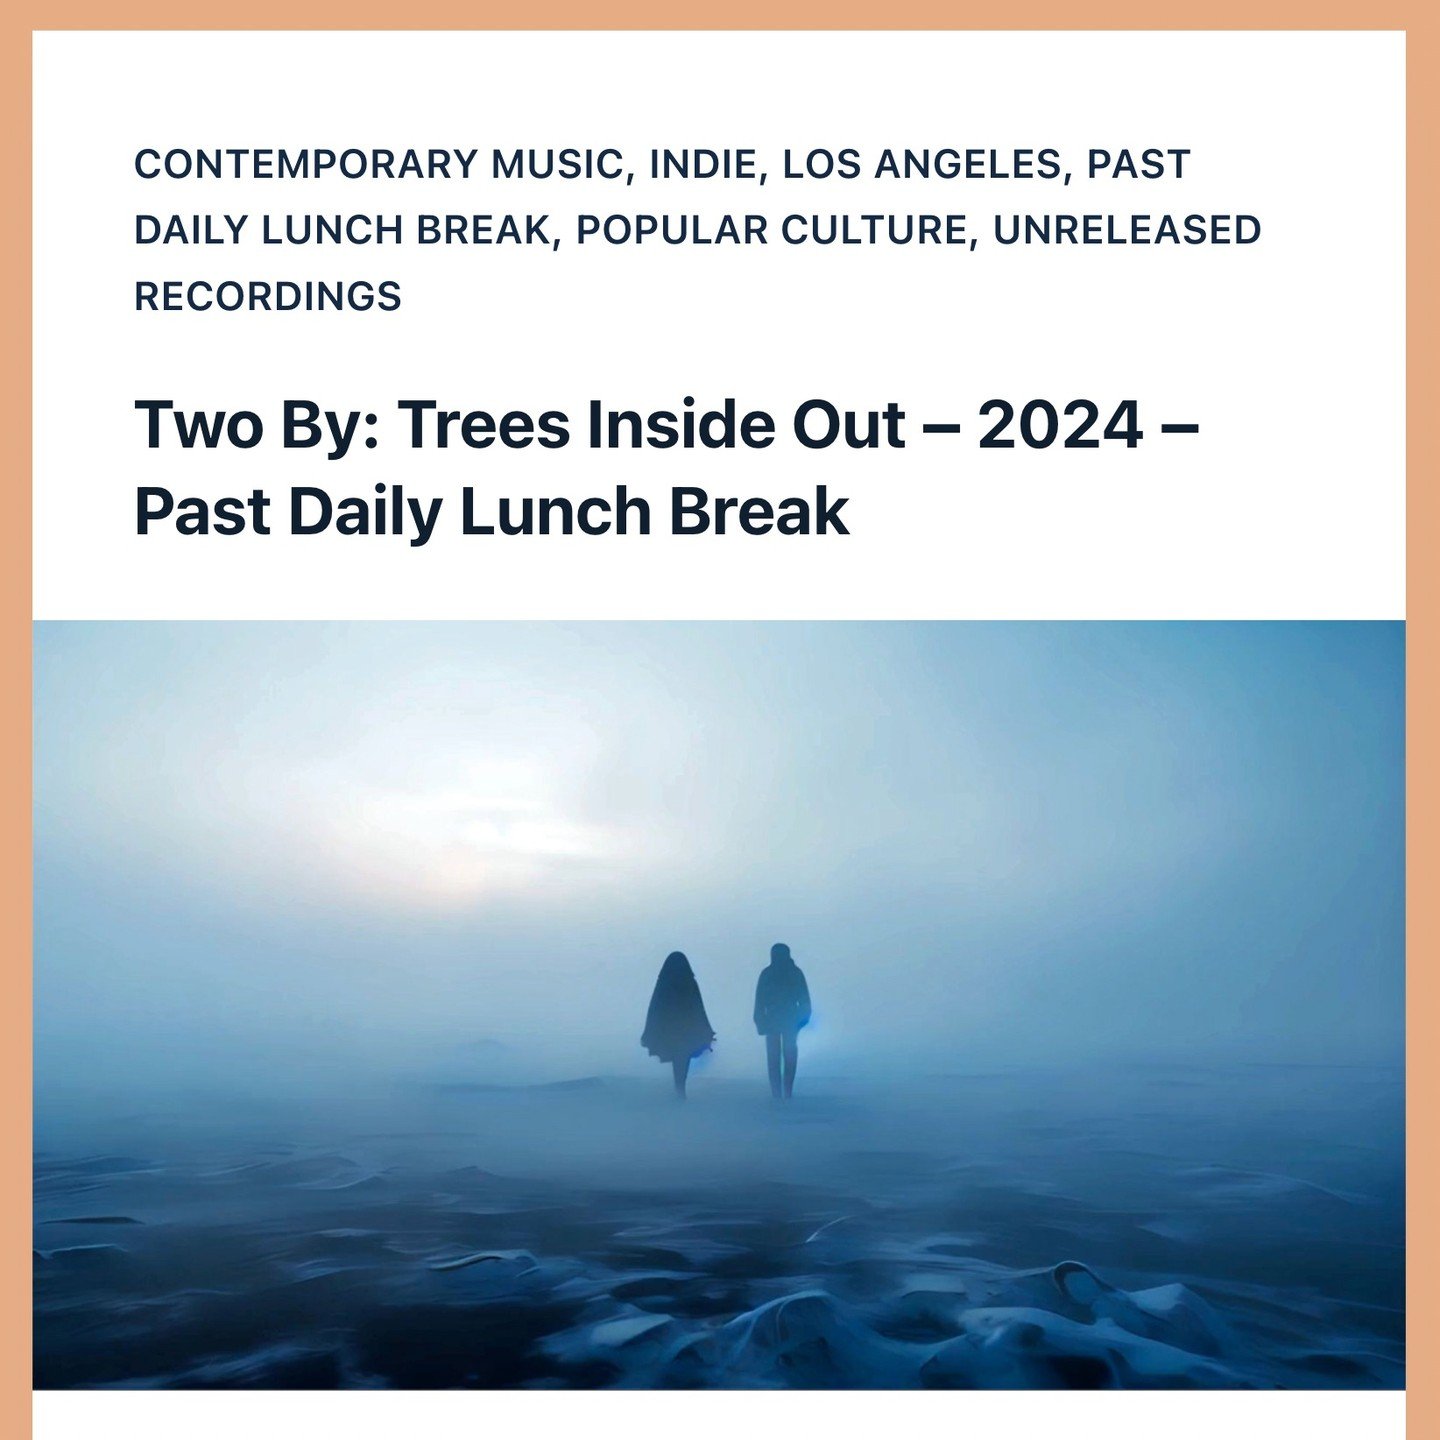 https://pastdaily.com/2024/04/19/two-by-trees-inside-out-2024-past-daily-lunch-break/